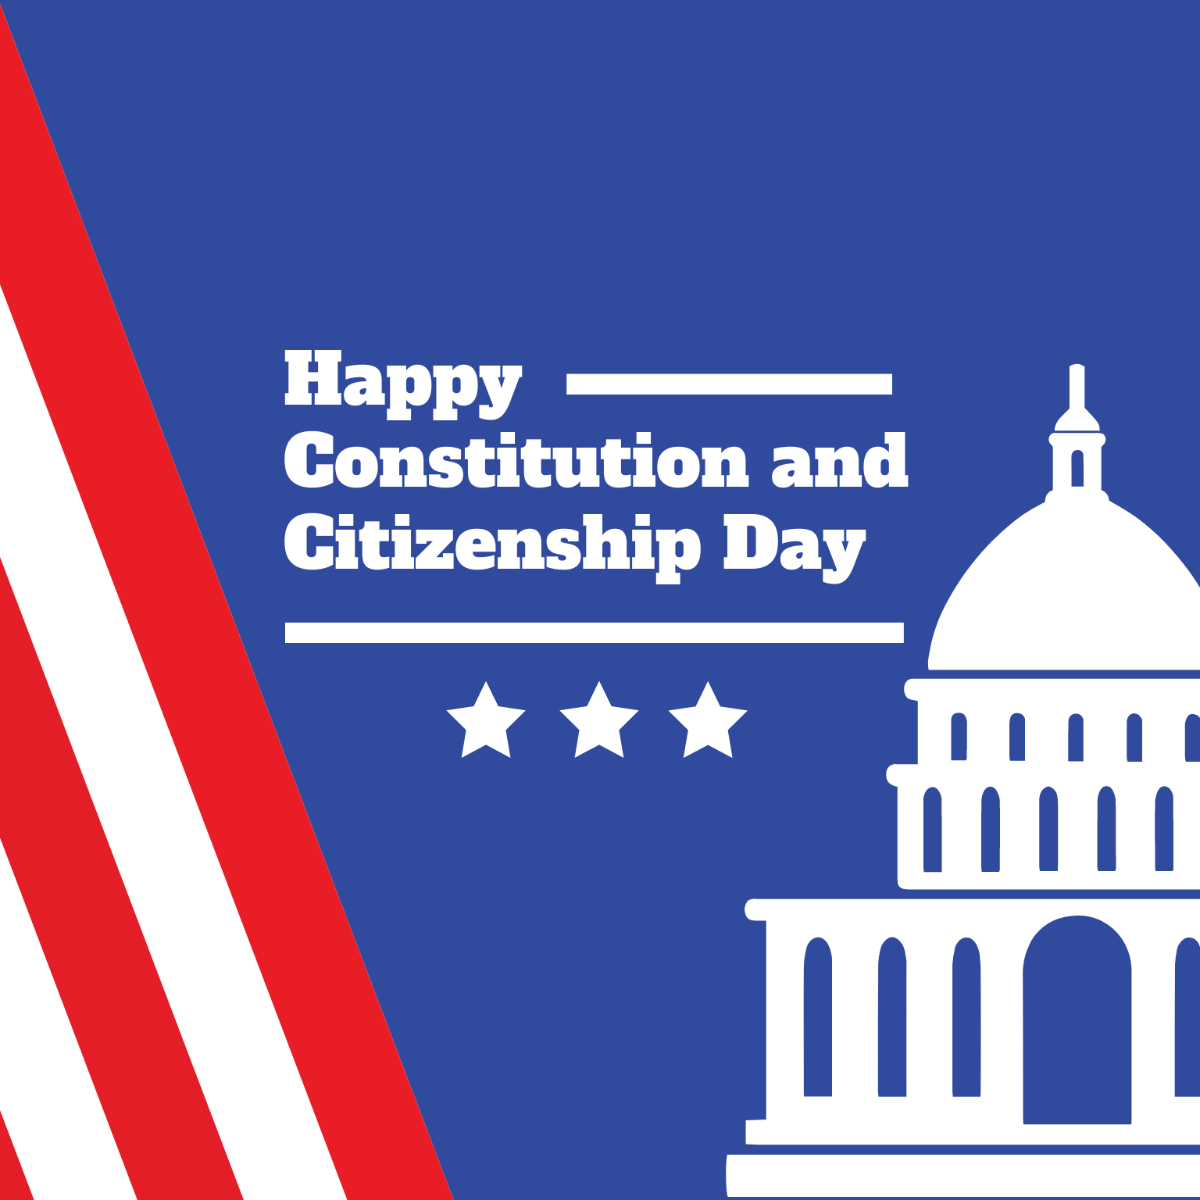 Happy Constitution and Citizenship Day Illustration